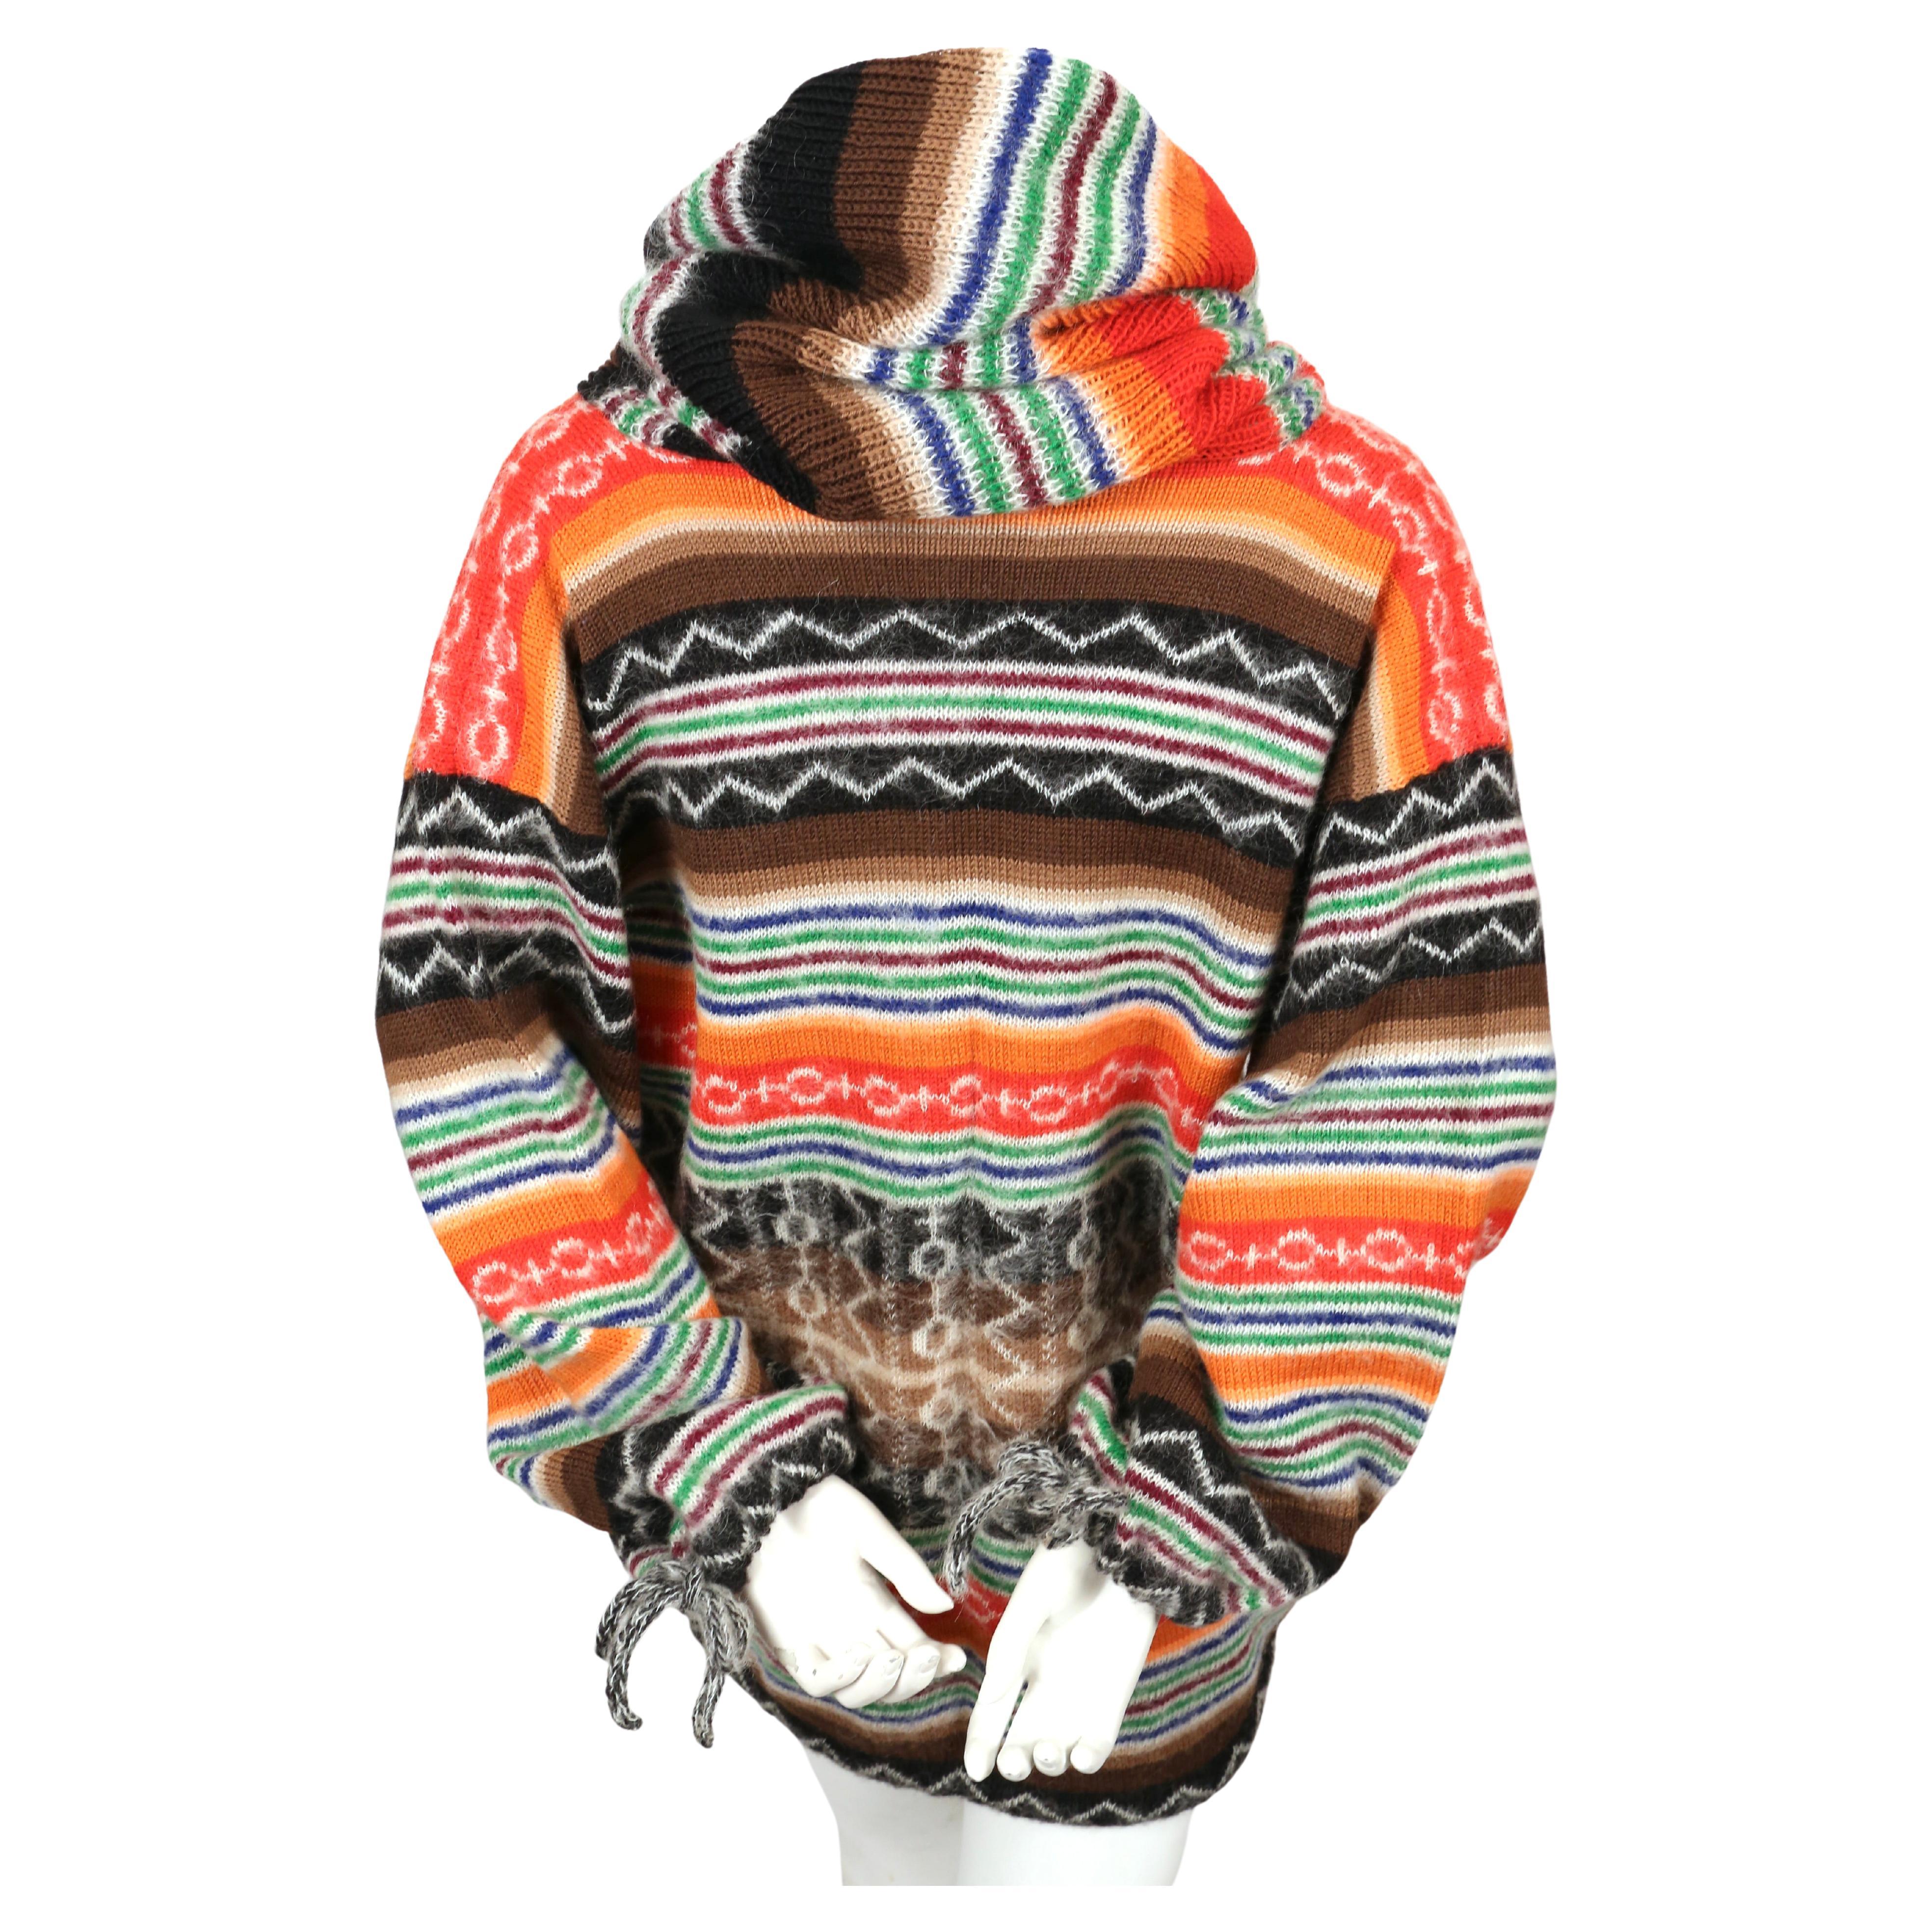 Women's or Men's 1977 KANSAI YAMAMOTO sweater with large hood For Sale